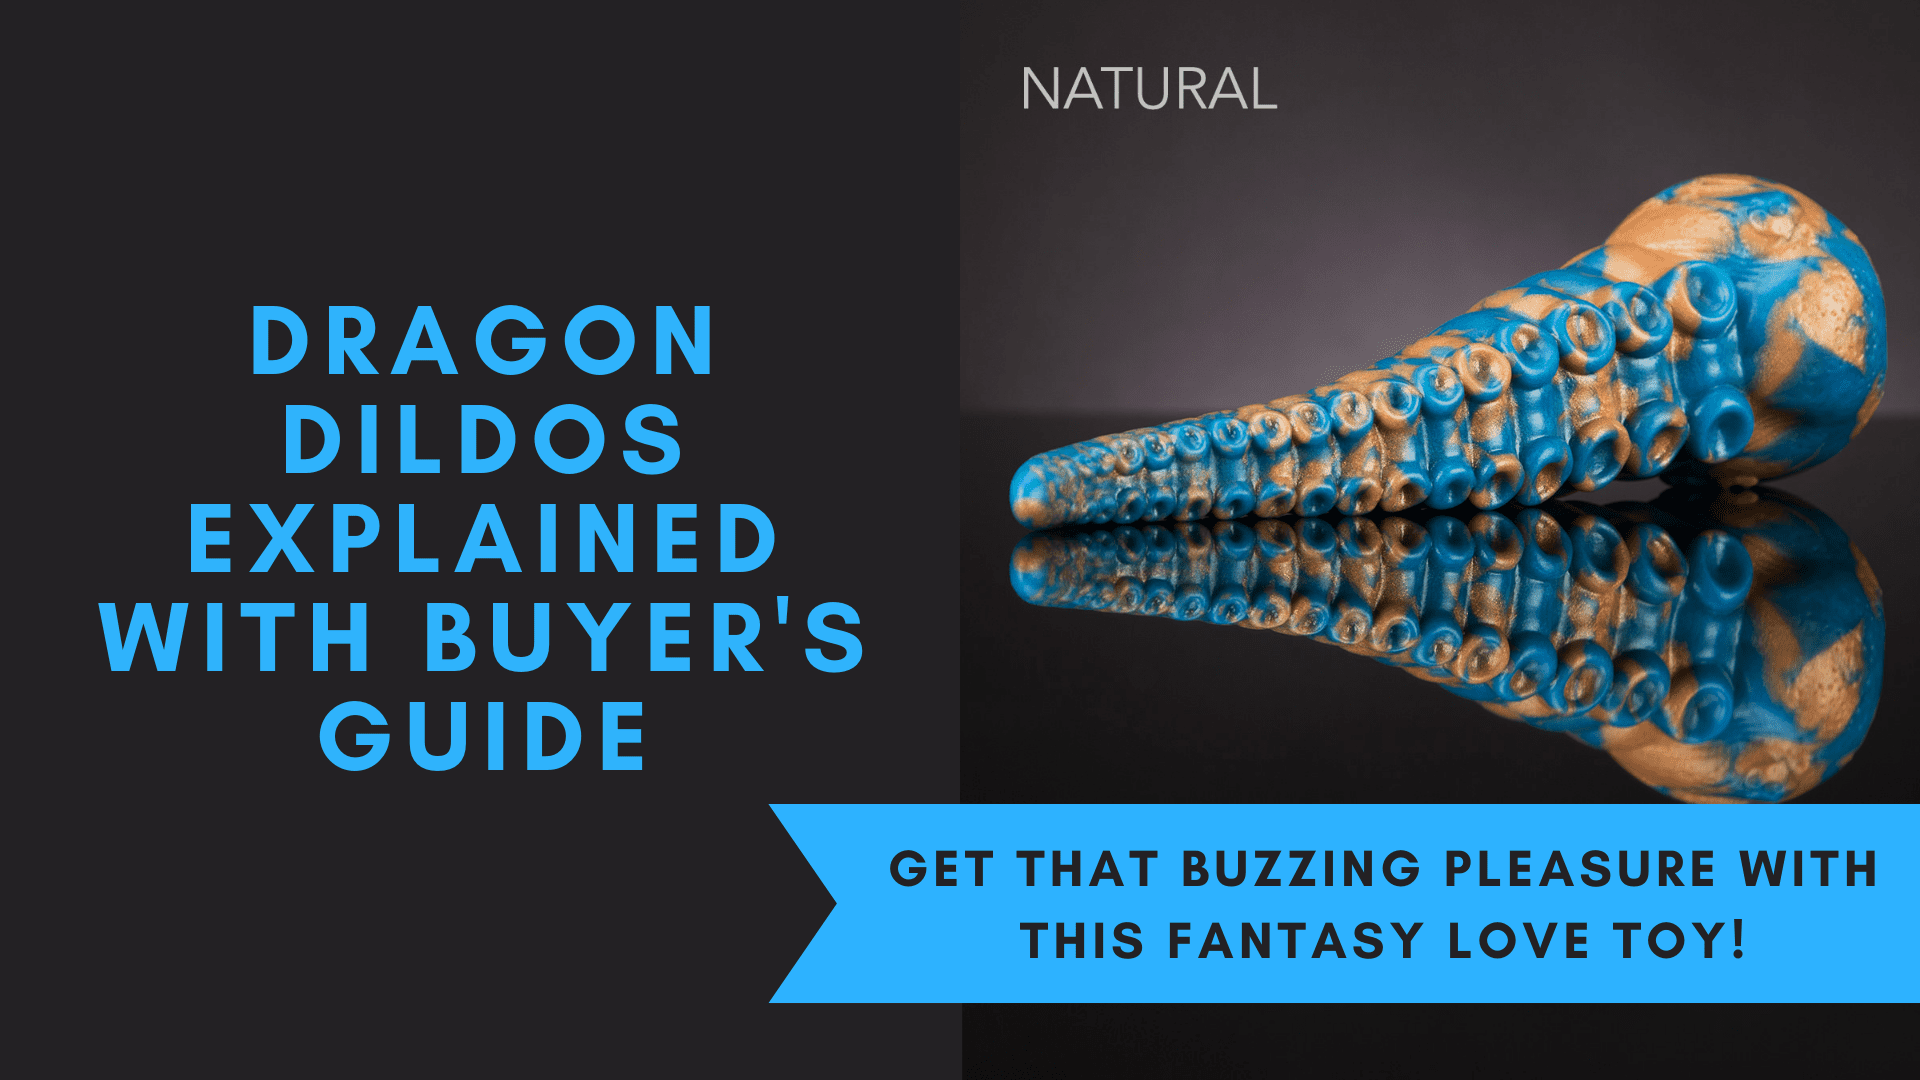 Dragon Dildos Explained With Buyer's Guide